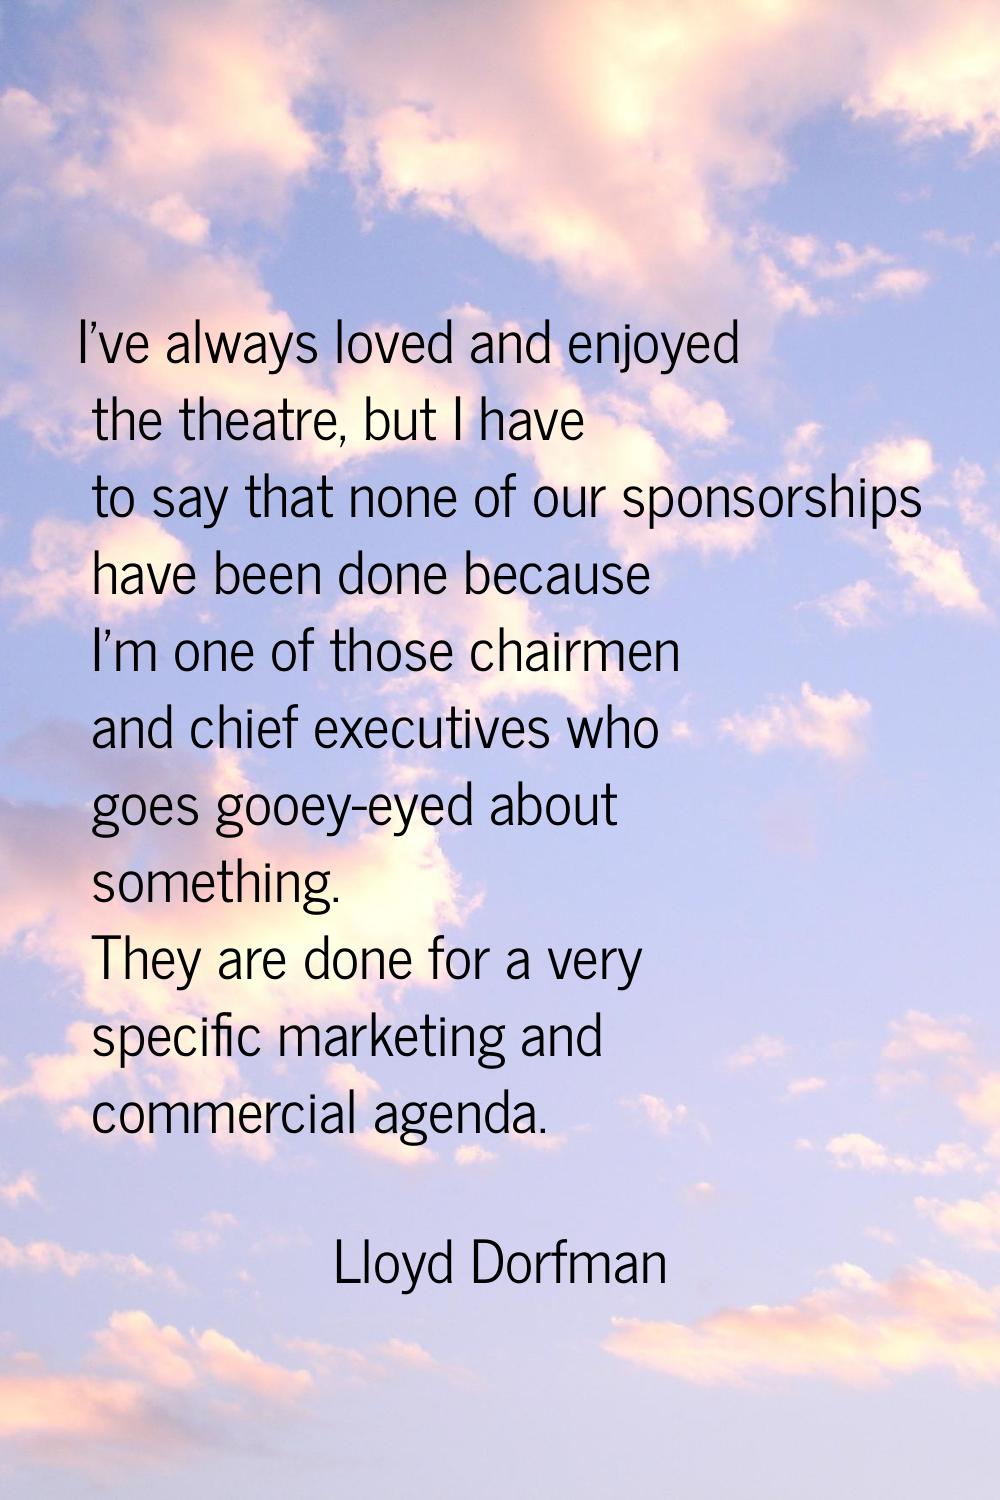 I've always loved and enjoyed the theatre, but I have to say that none of our sponsorships have bee